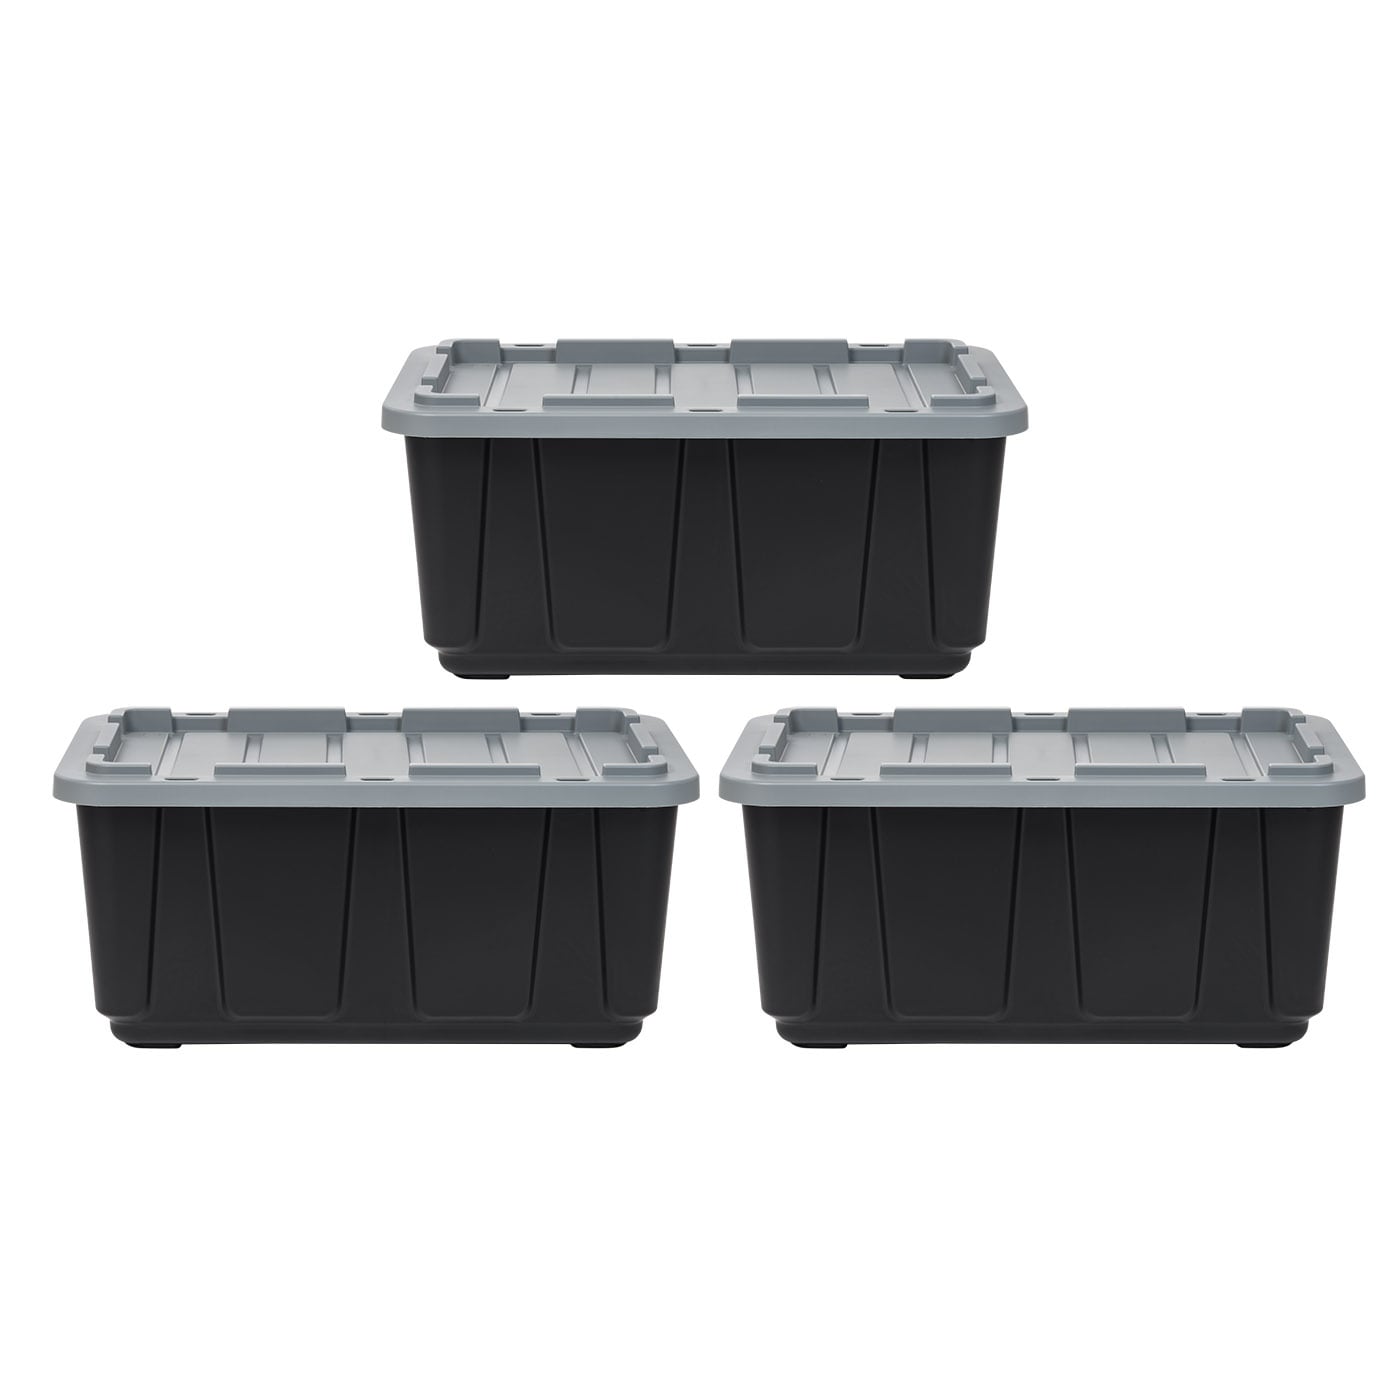 Extra Large Storage Bins with Lids - 27Gal Plastic Storage Bins with Doors,  3 Packs Stackable Storage Bins For Closet Organizers and Storage, Folding